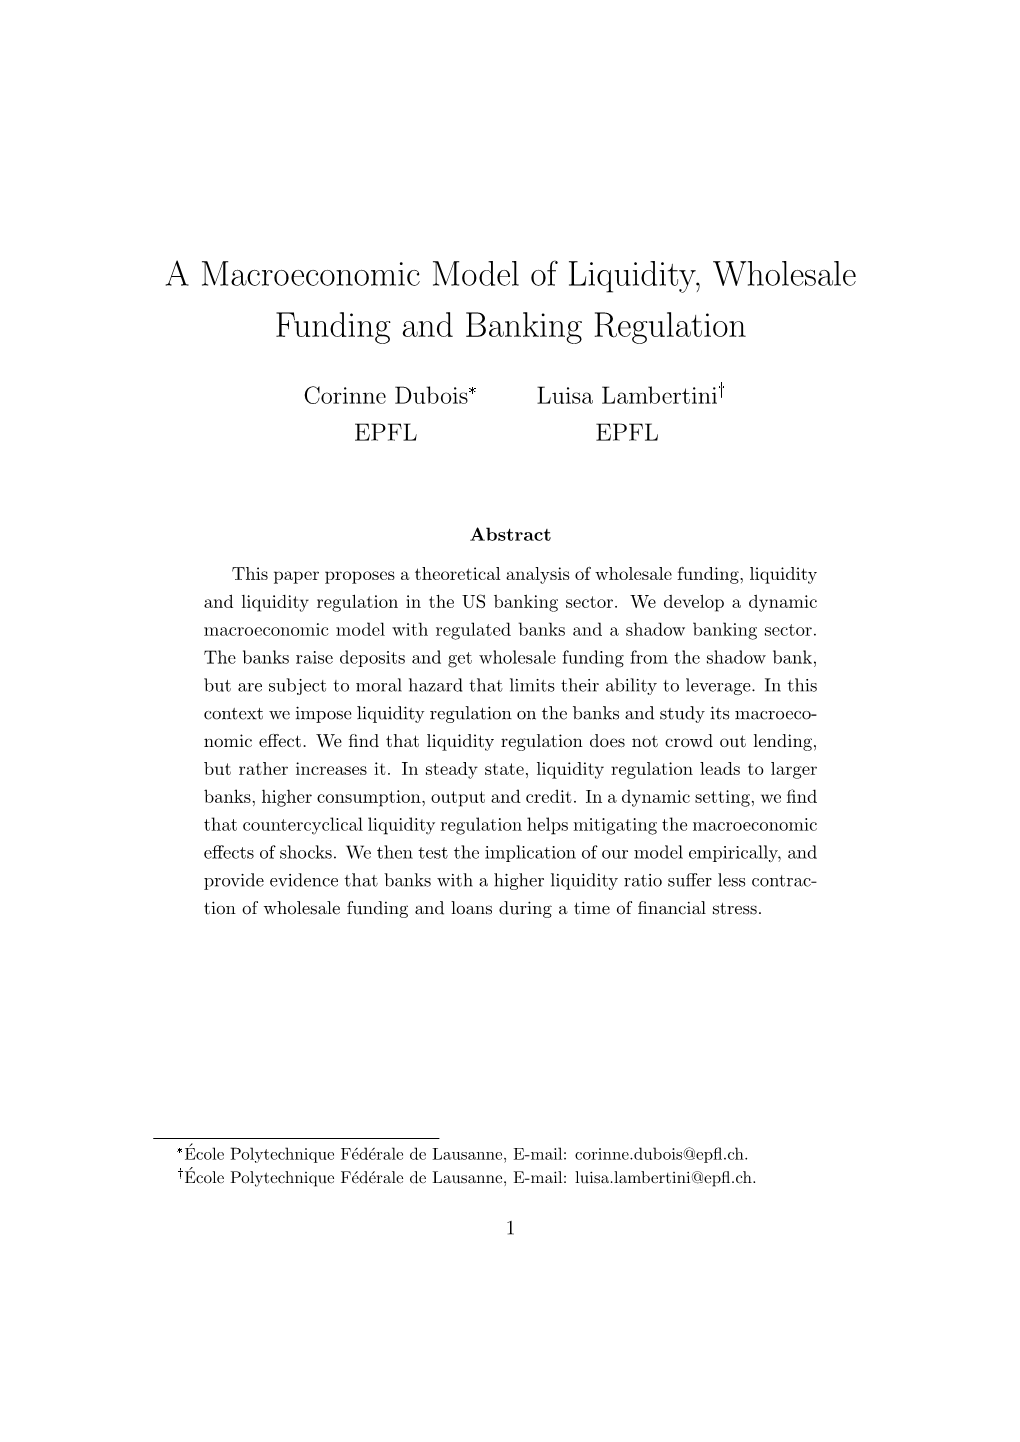 A Macroeconomic Model of Liquidity, Wholesale Funding and Banking Regulation